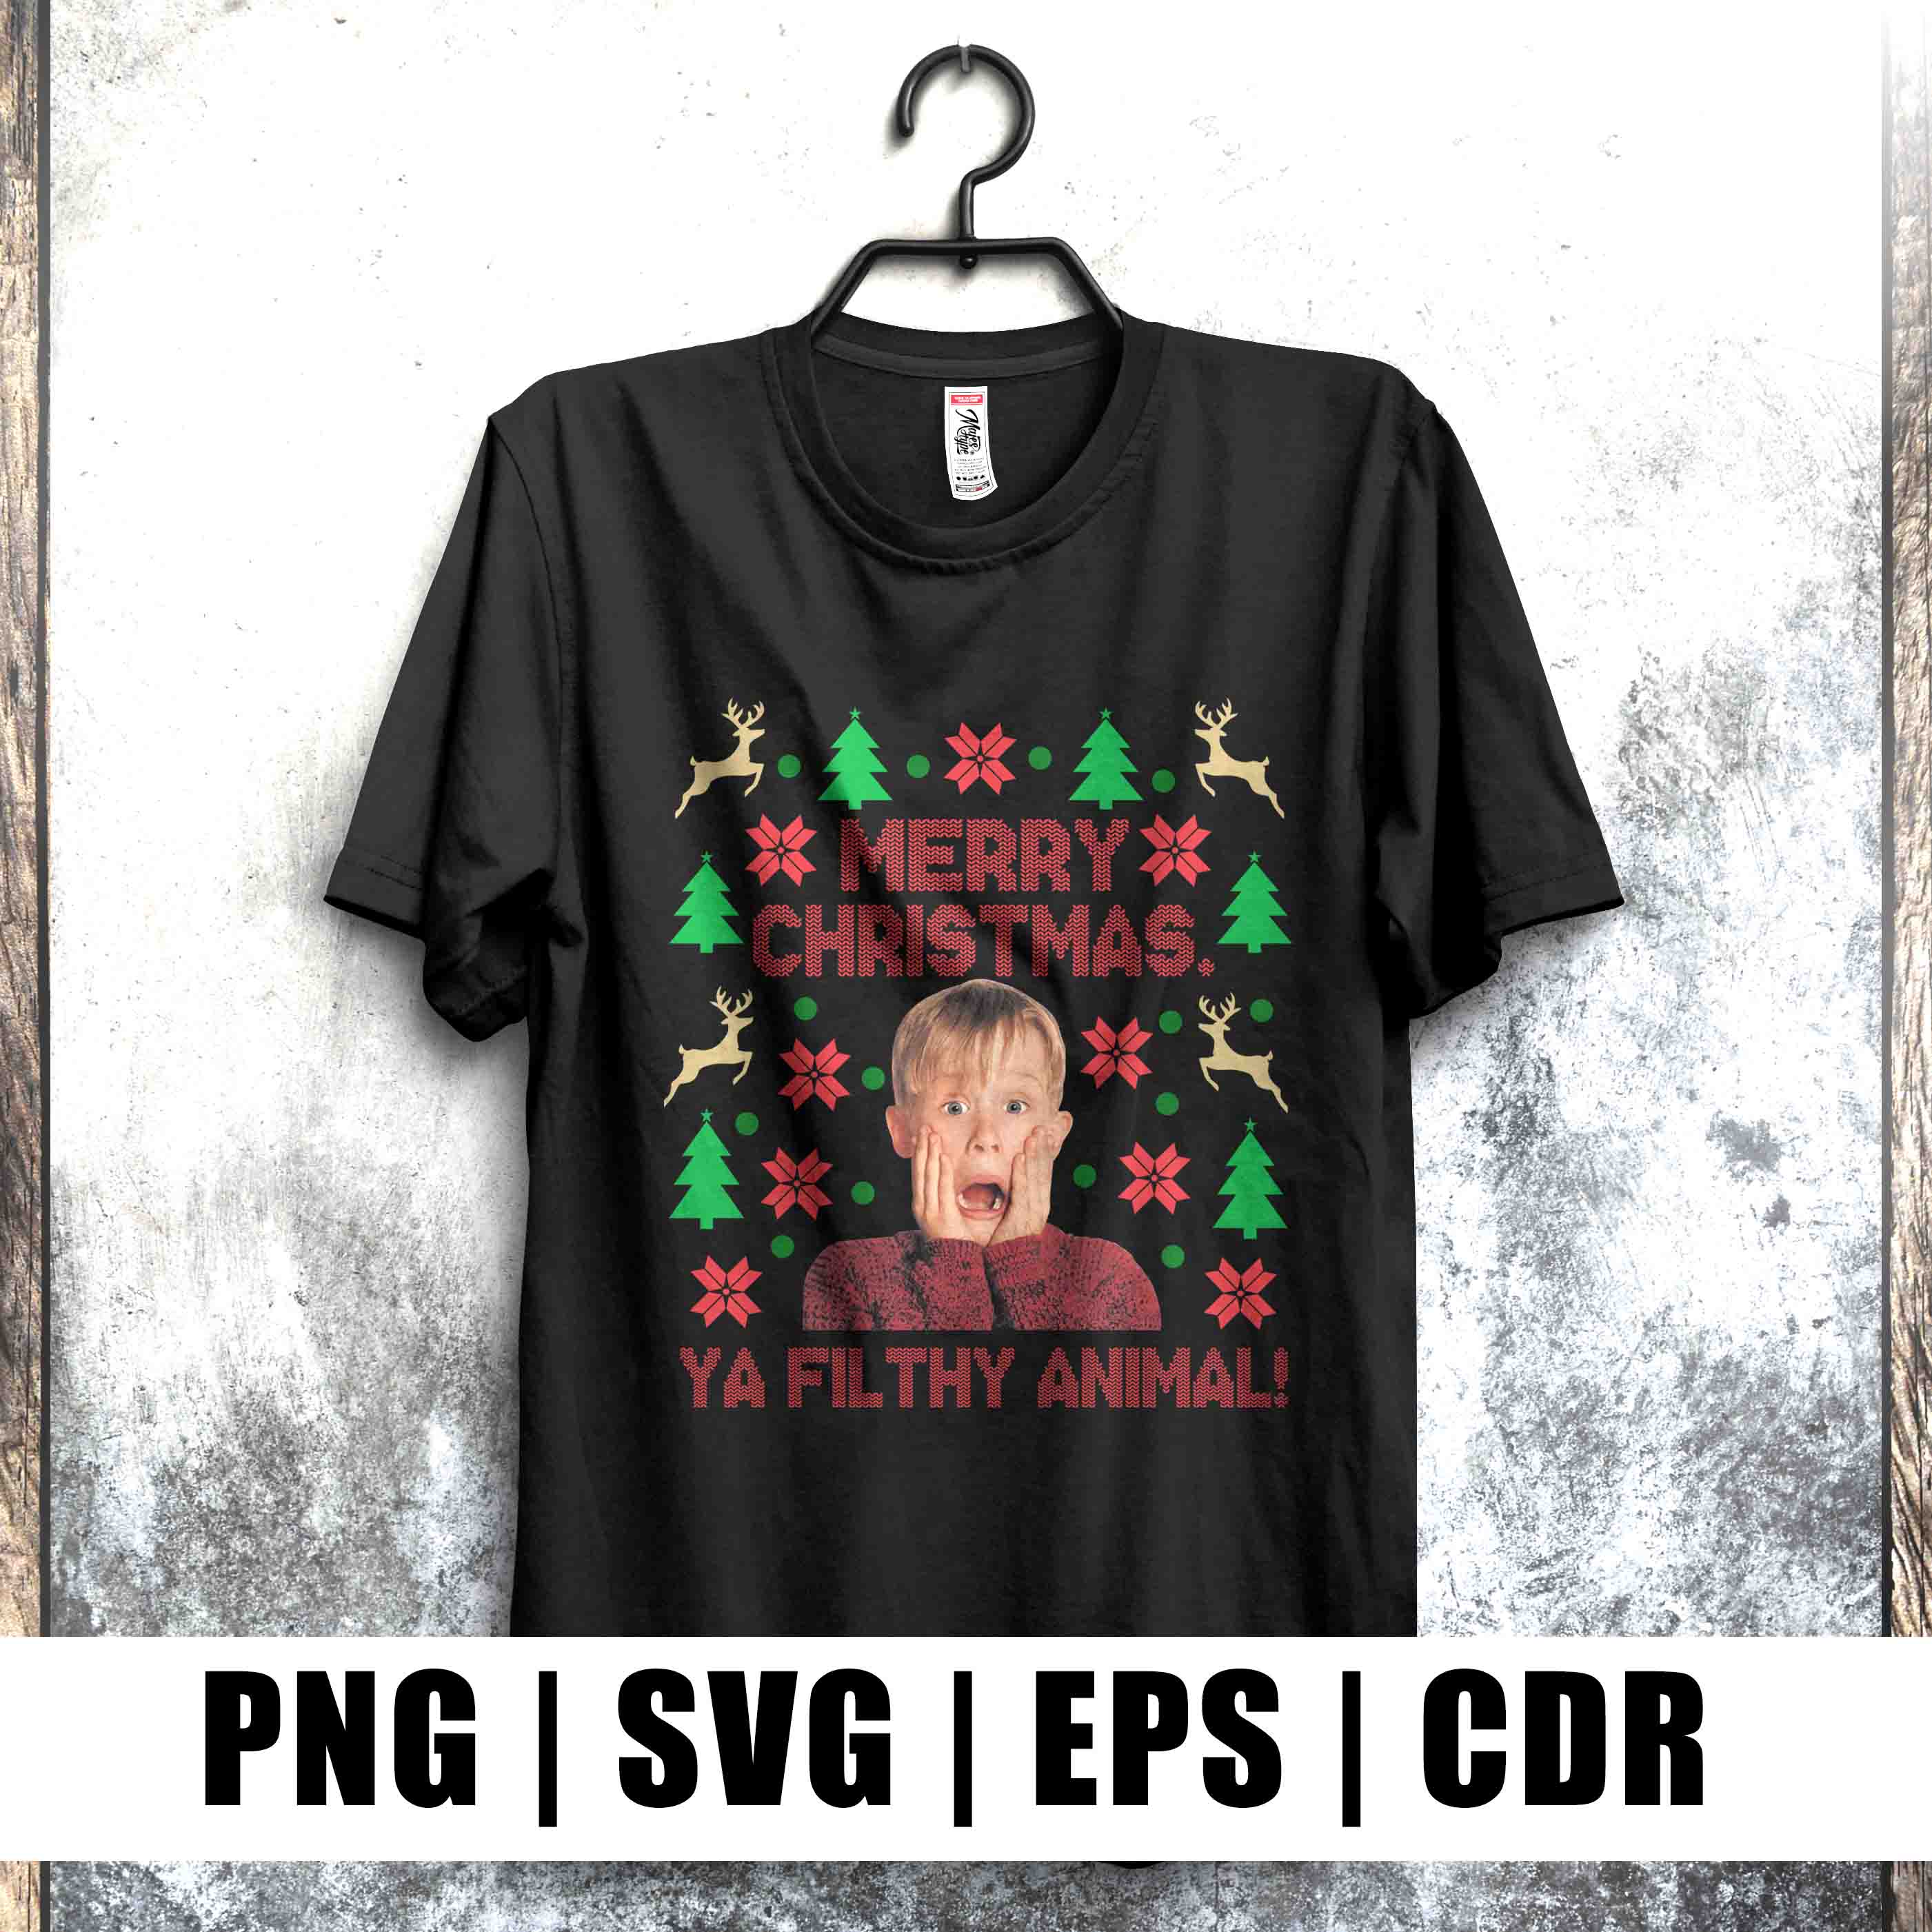 Merry Christmas T-shirt and Sweater Design cover image.